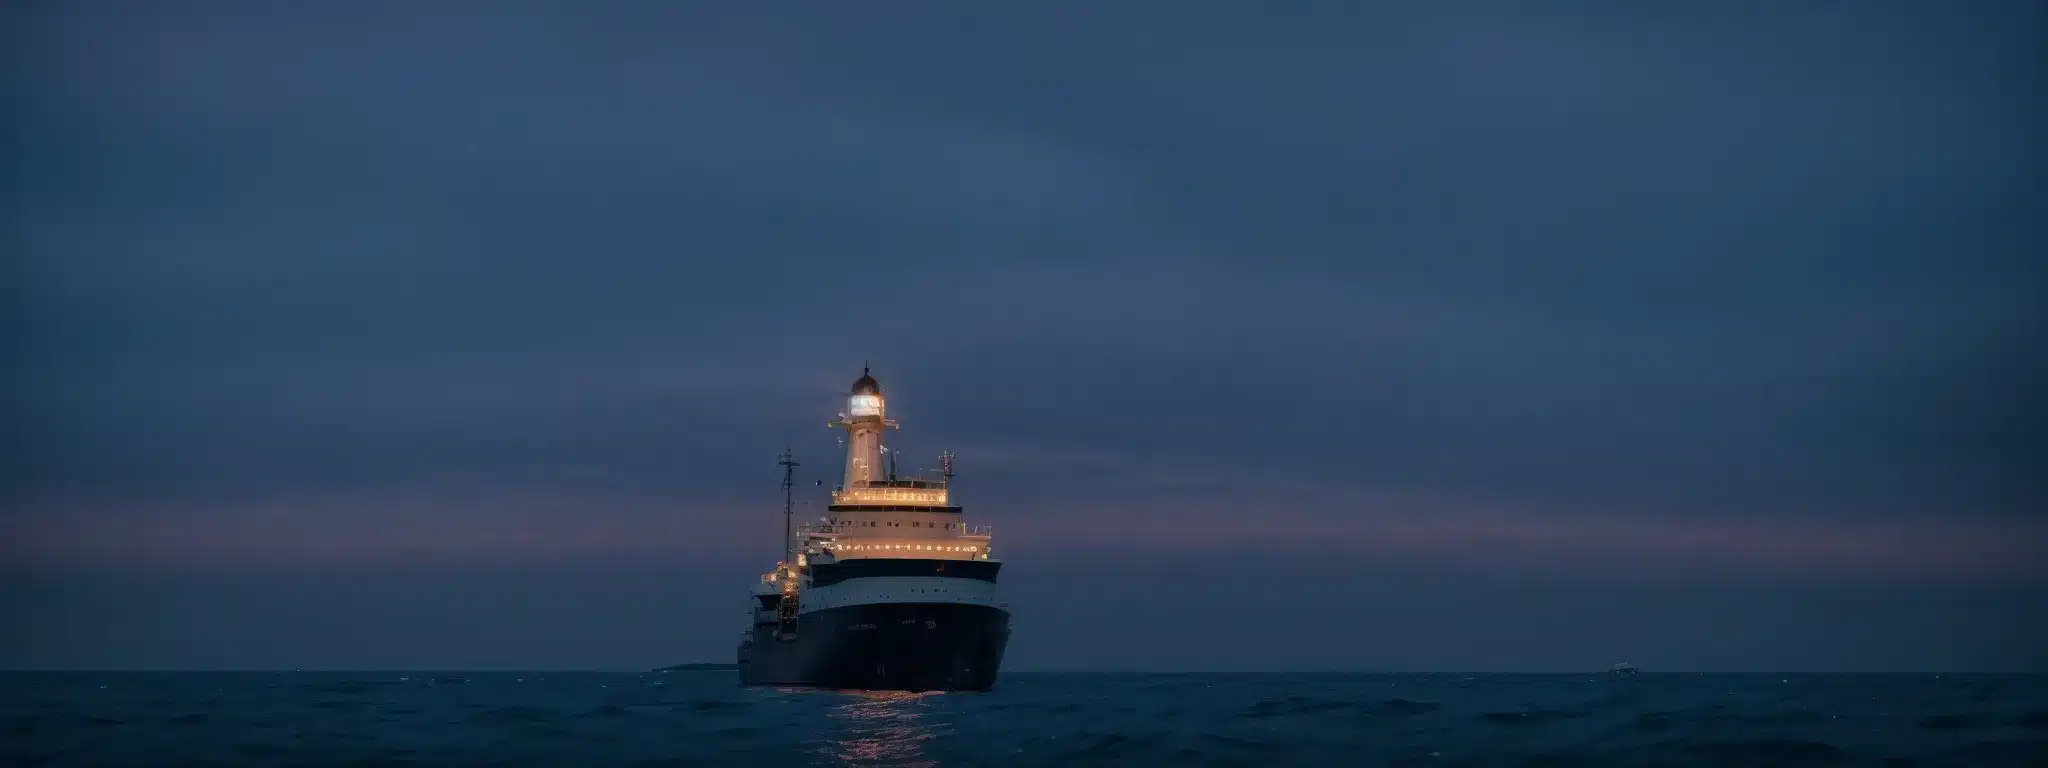 A Stately Ship Cuts Through Calm Ocean Waters Under A Twilight Sky, Approaching A Distant, Glowing Lighthouse.